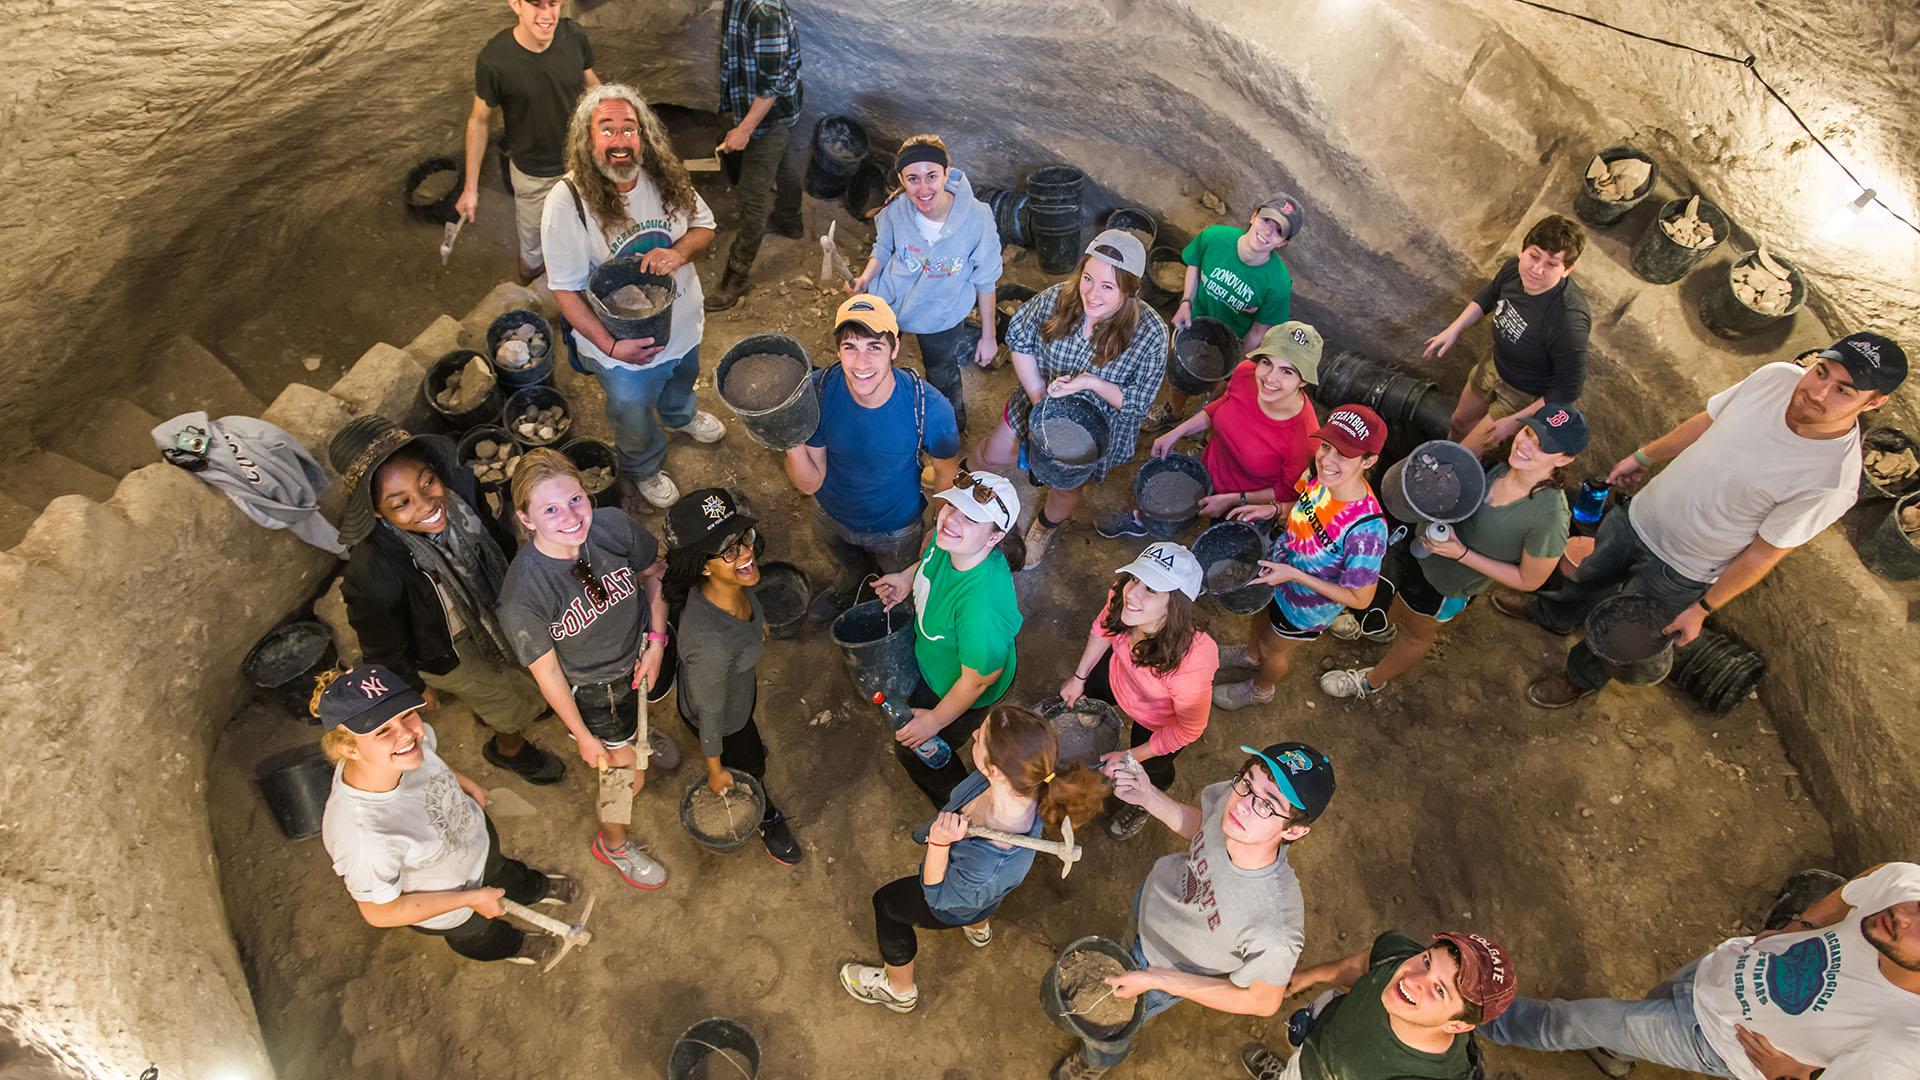 Students on an extended study to Israel dig for ancient artifacts from the historic site Beit Guvrin